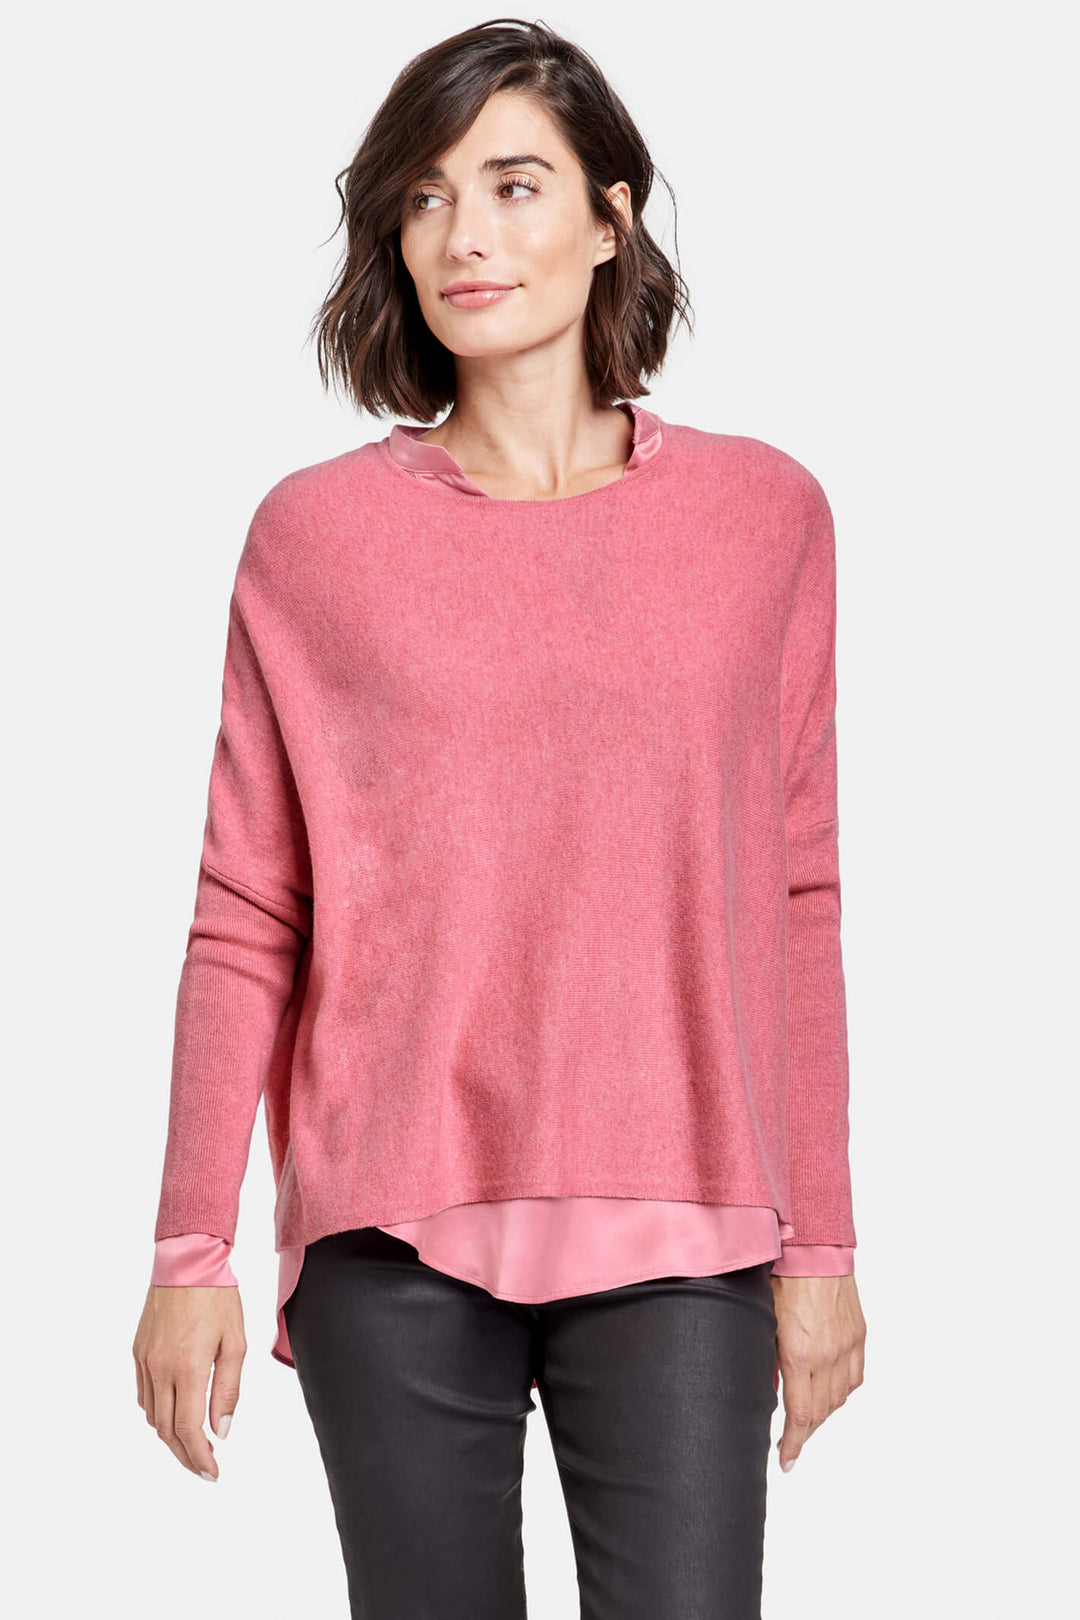 Gerry Weber 871014 Rose Pink Knitted Jumper - Experience Boutique